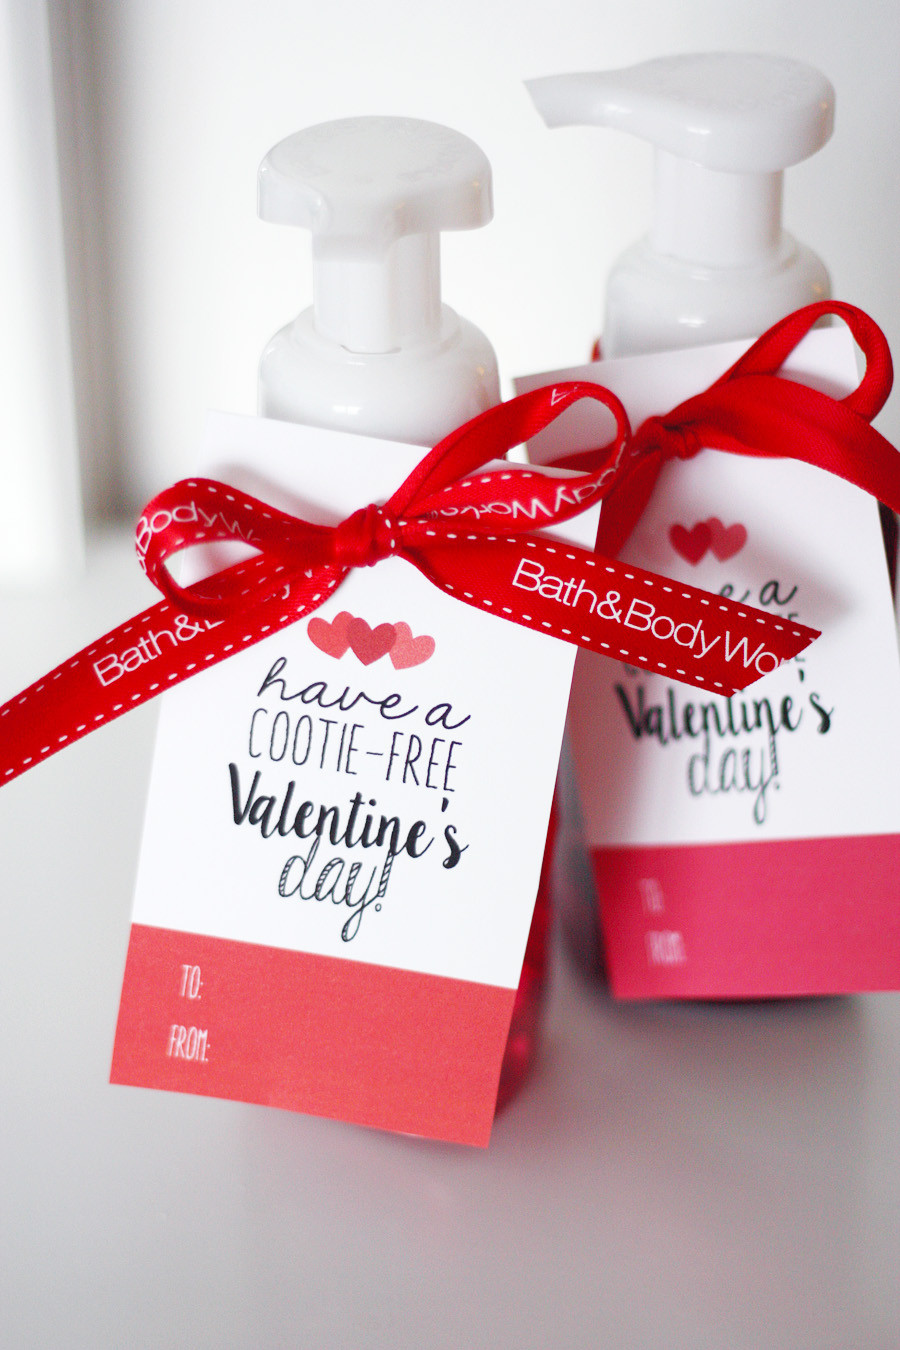 Valentine Gift Ideas For Coworkers
 Valentines Day Gift Ideas For Coworkers Pinterest